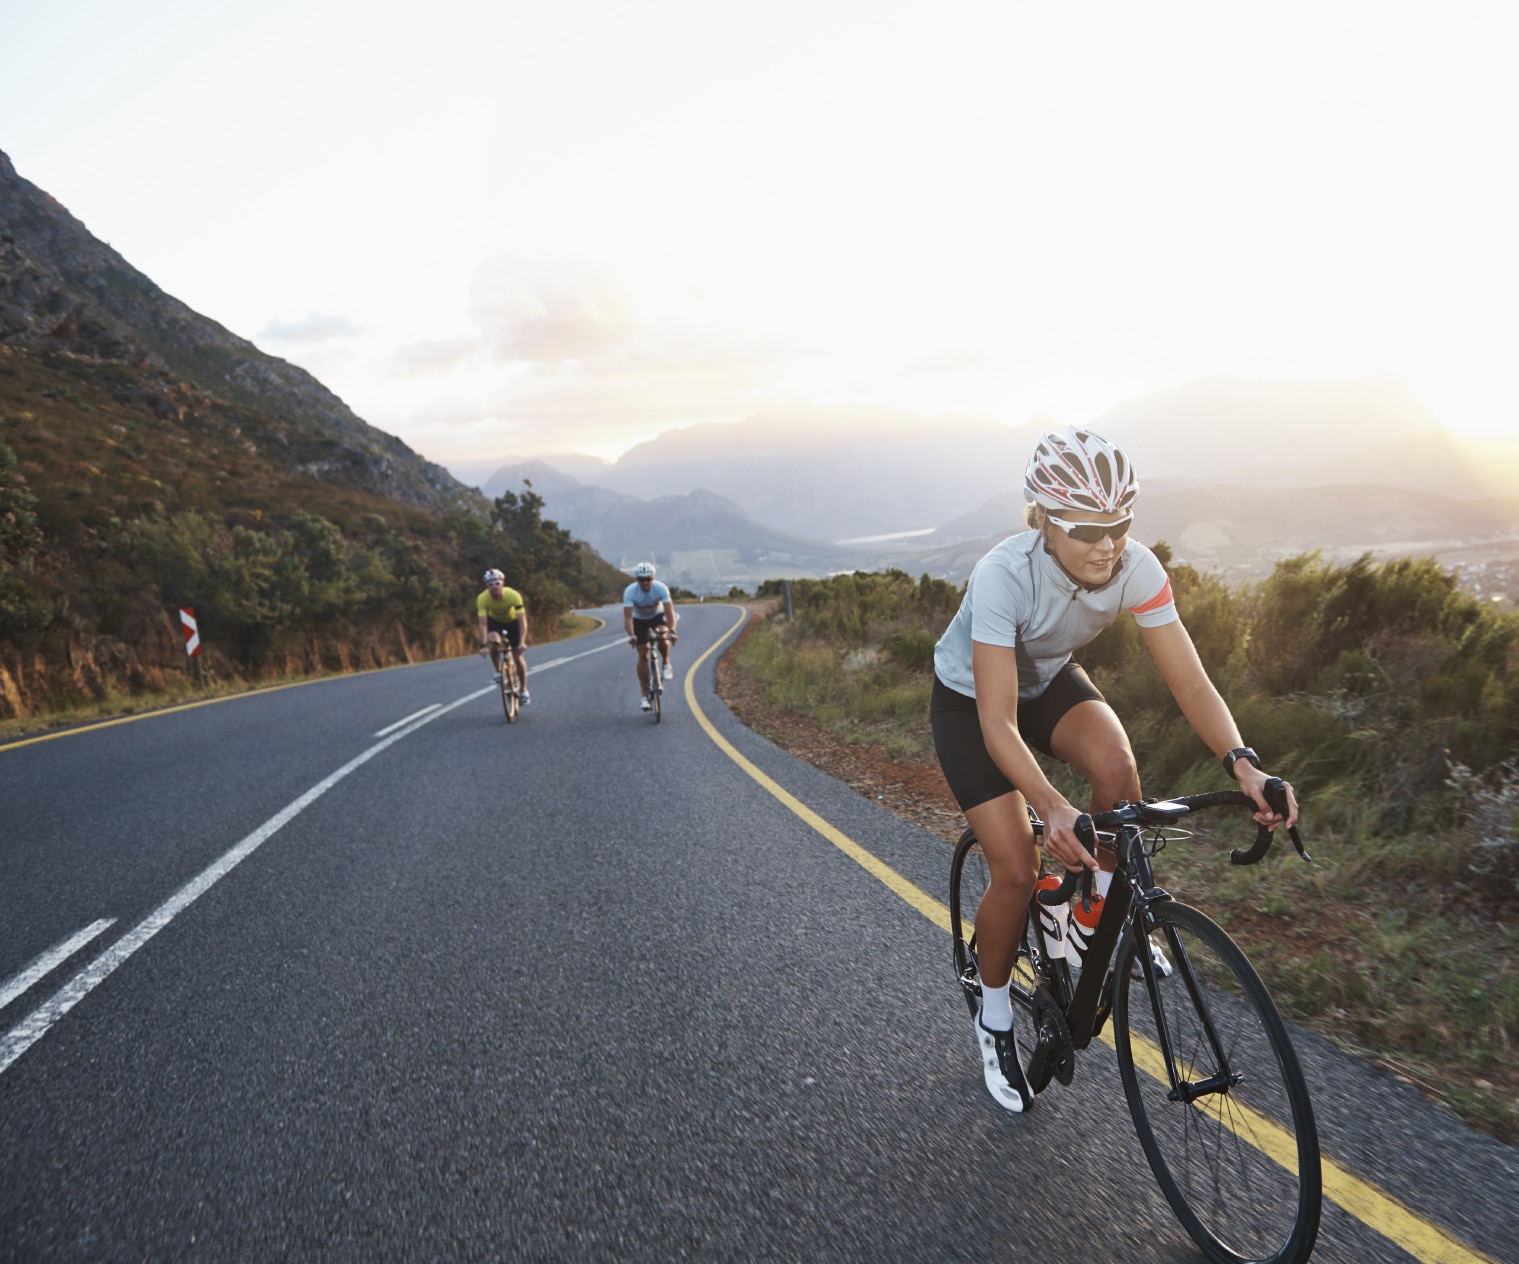 5 Very Important Tips For Safe Cycling